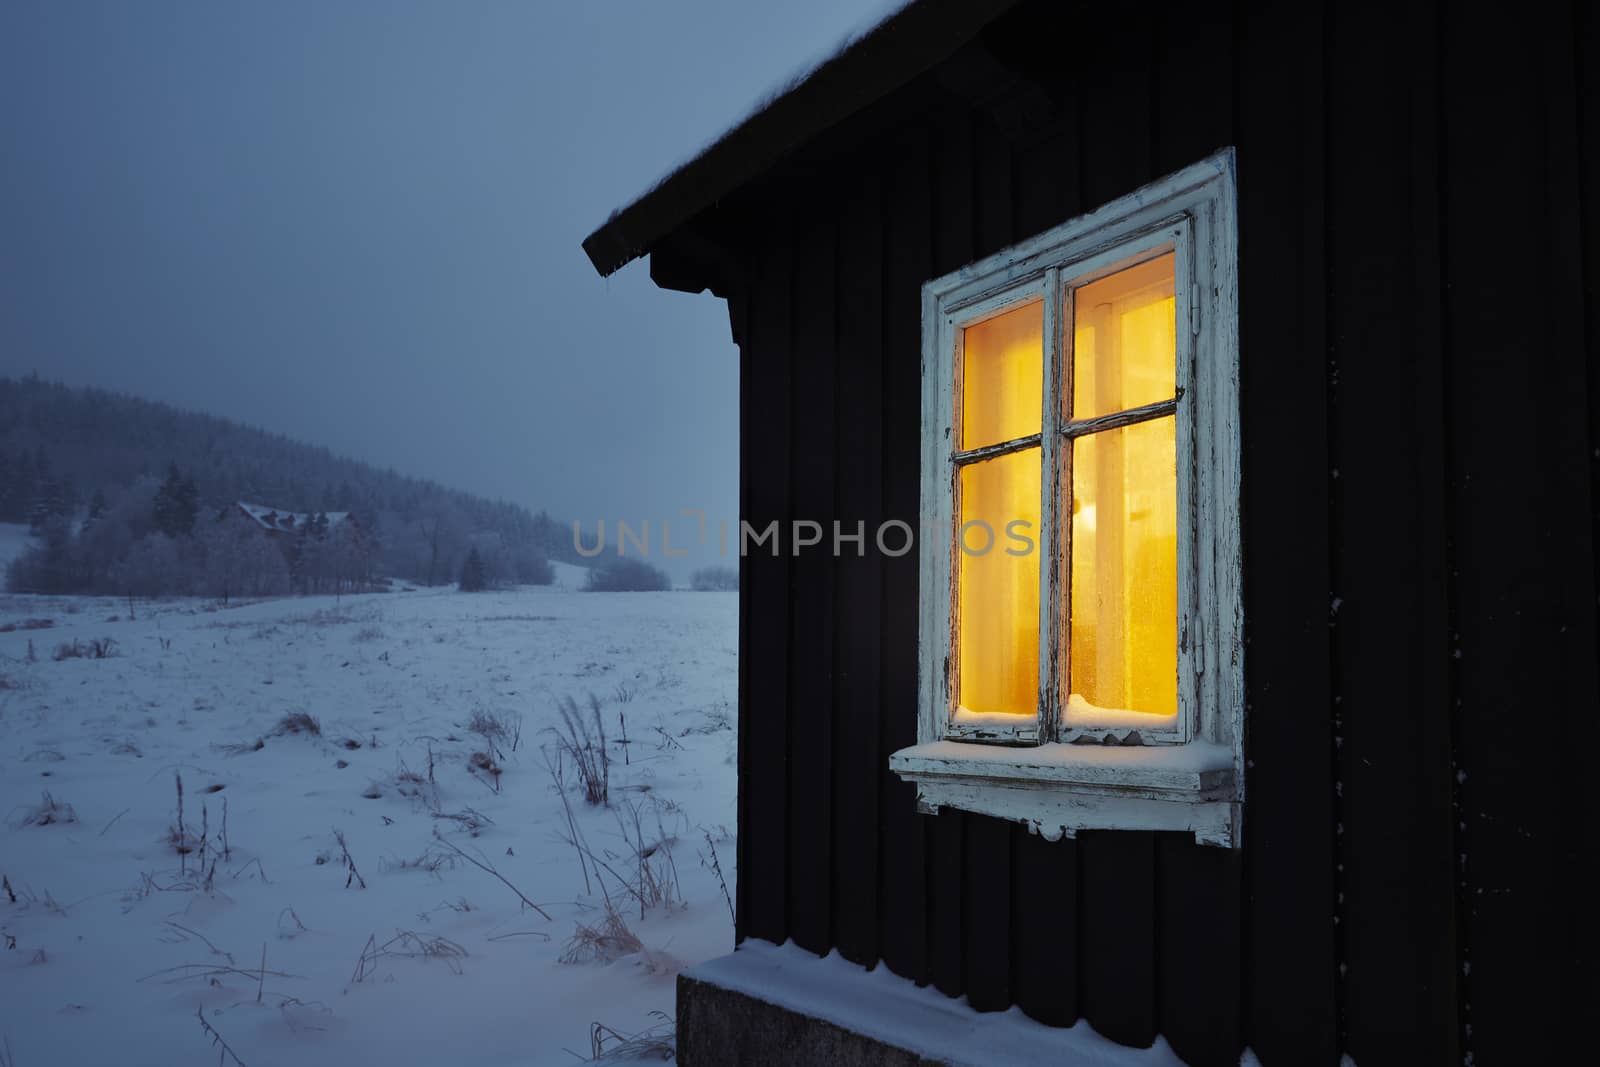 Night in mountains - wooden house in winter landscape 